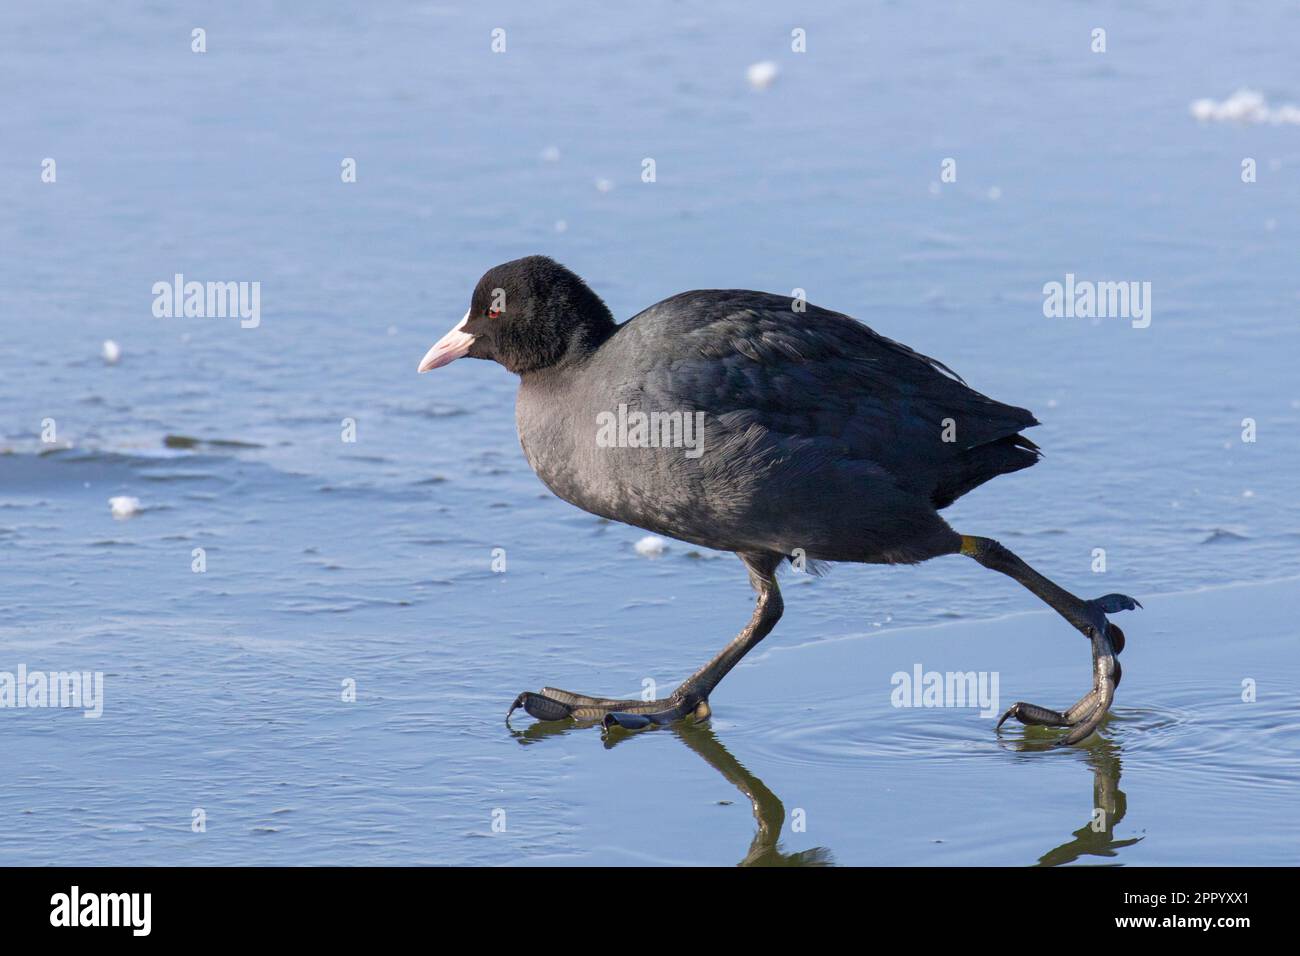 Eurasian coot / common coot (Fulica atra) running over ice of frozen pond in winter Stock Photo